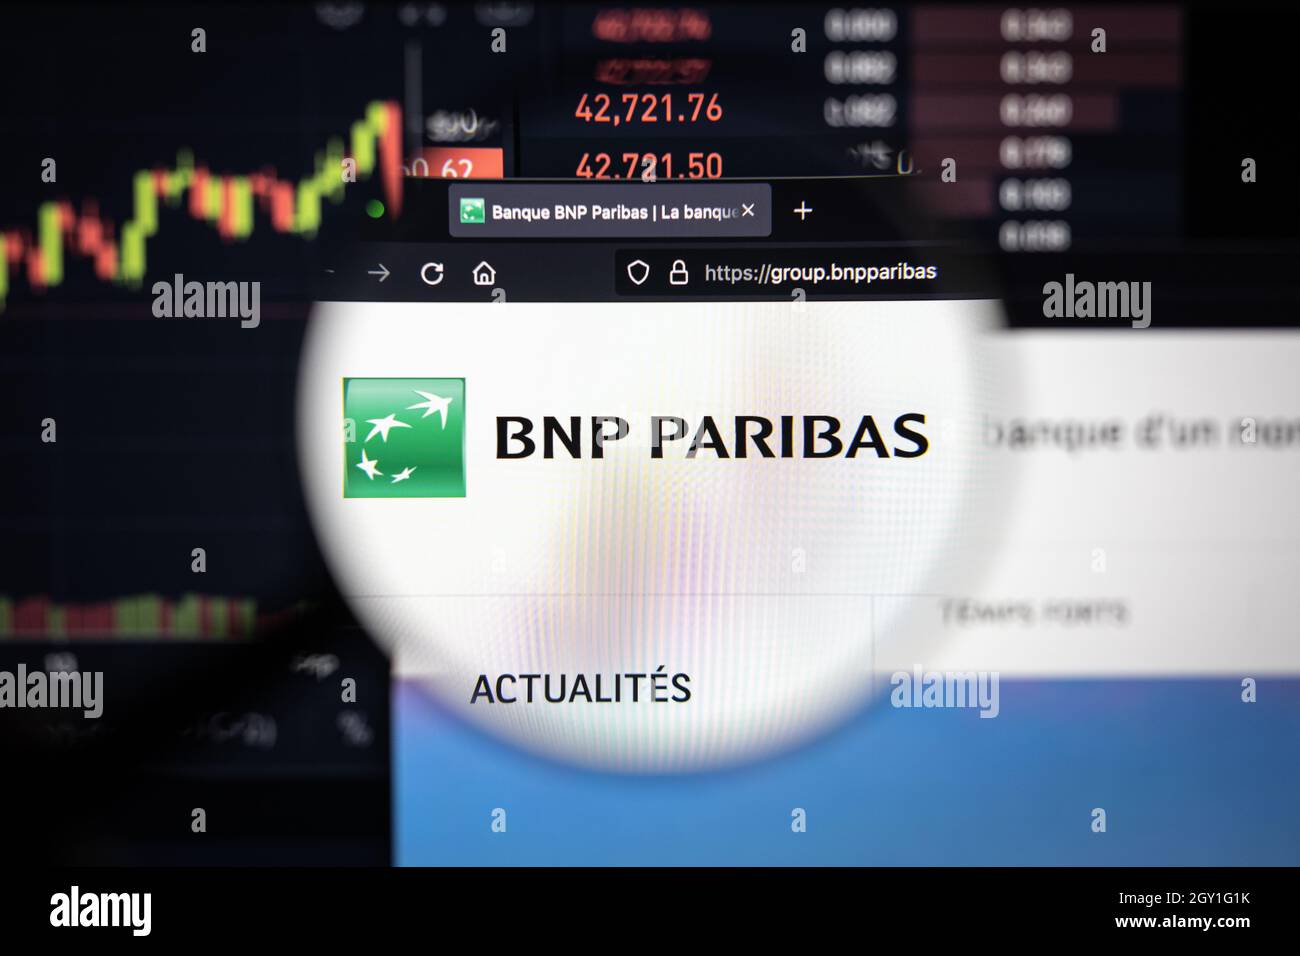 BNP Paribas company logo on a website with blurry stock market developments in the background, seen on a computer screen through a magnifying glass Stock Photo